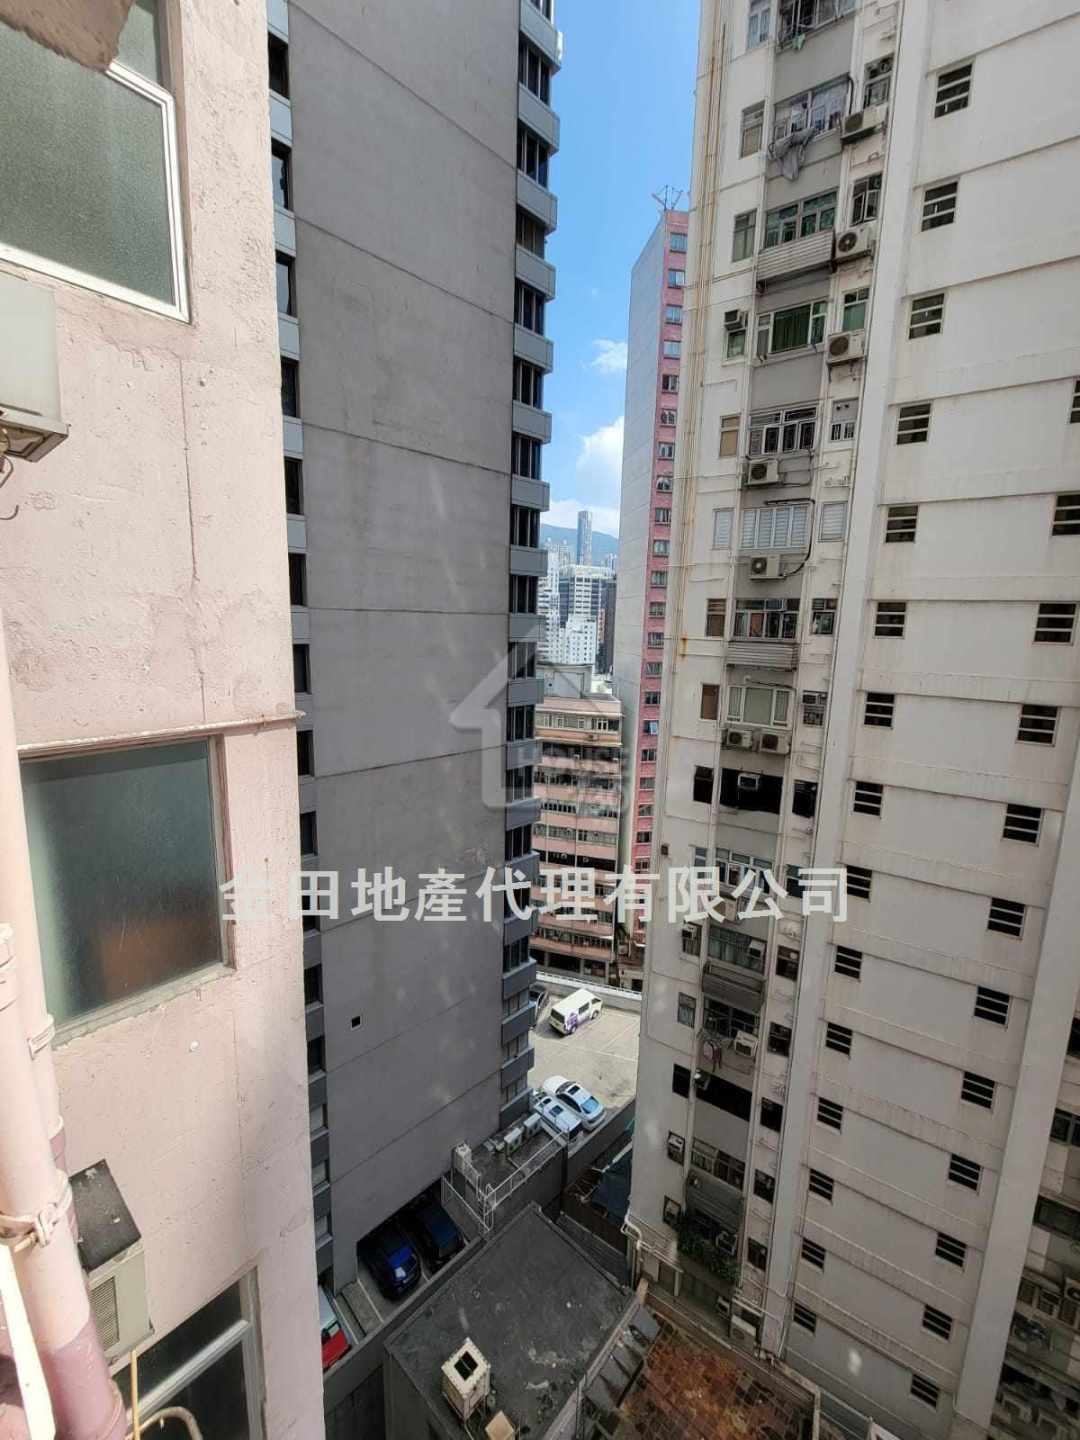 Wan Chai KWONG SANG HONG BUILDING Middle Floor View from Living Room House730-6282601